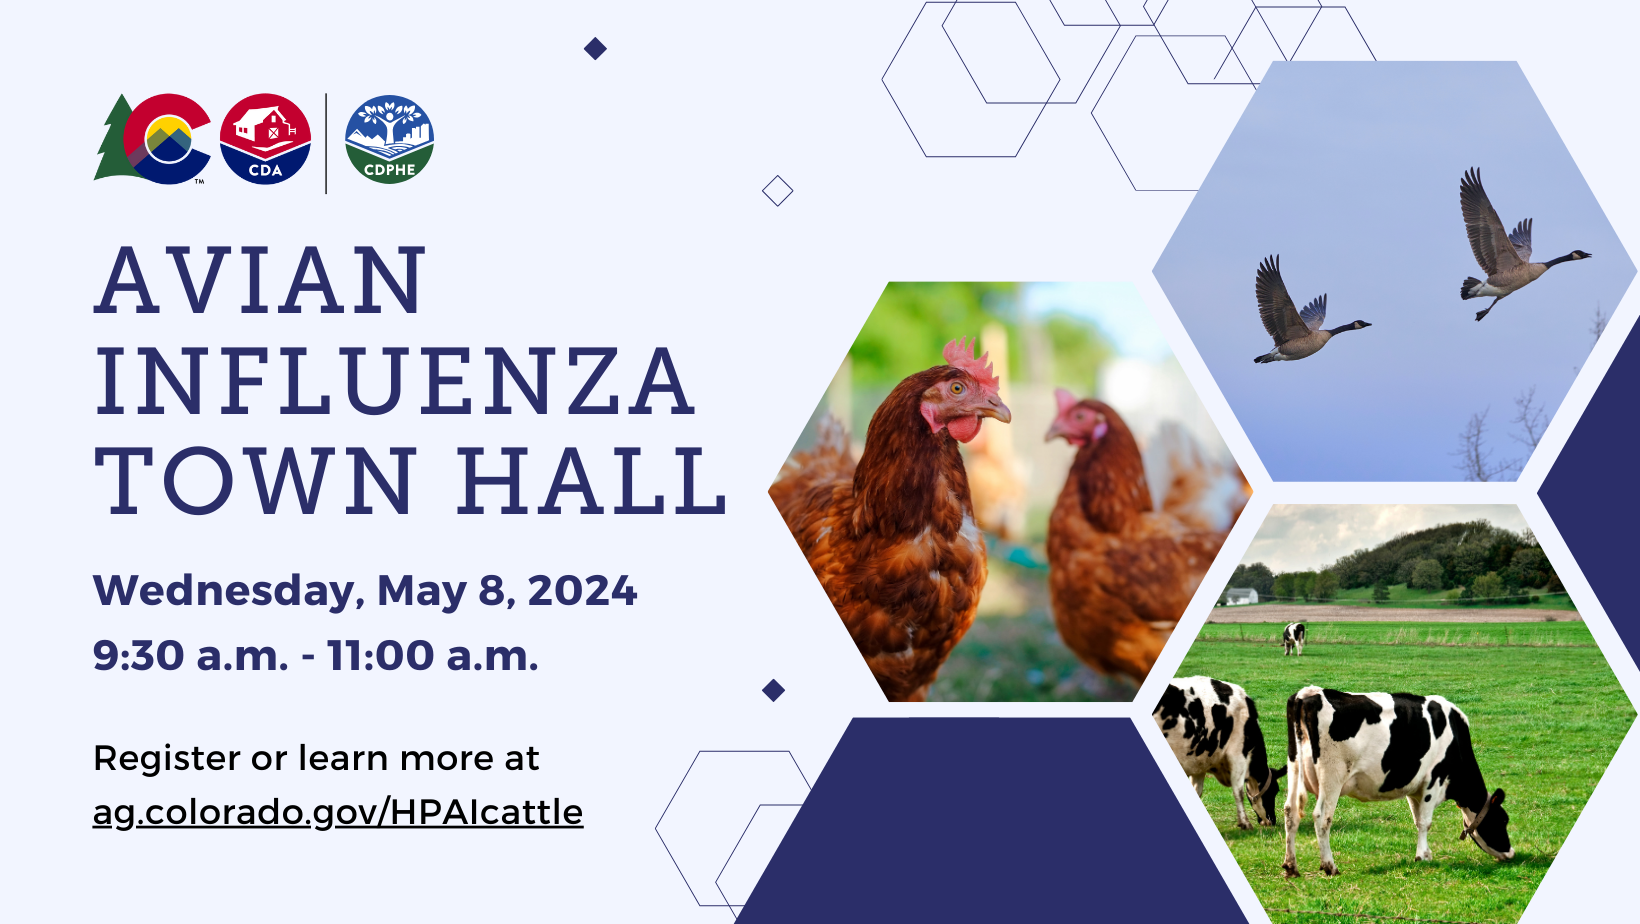 Avian influenza town hall on Wednesday, May 8 at 9:30 am